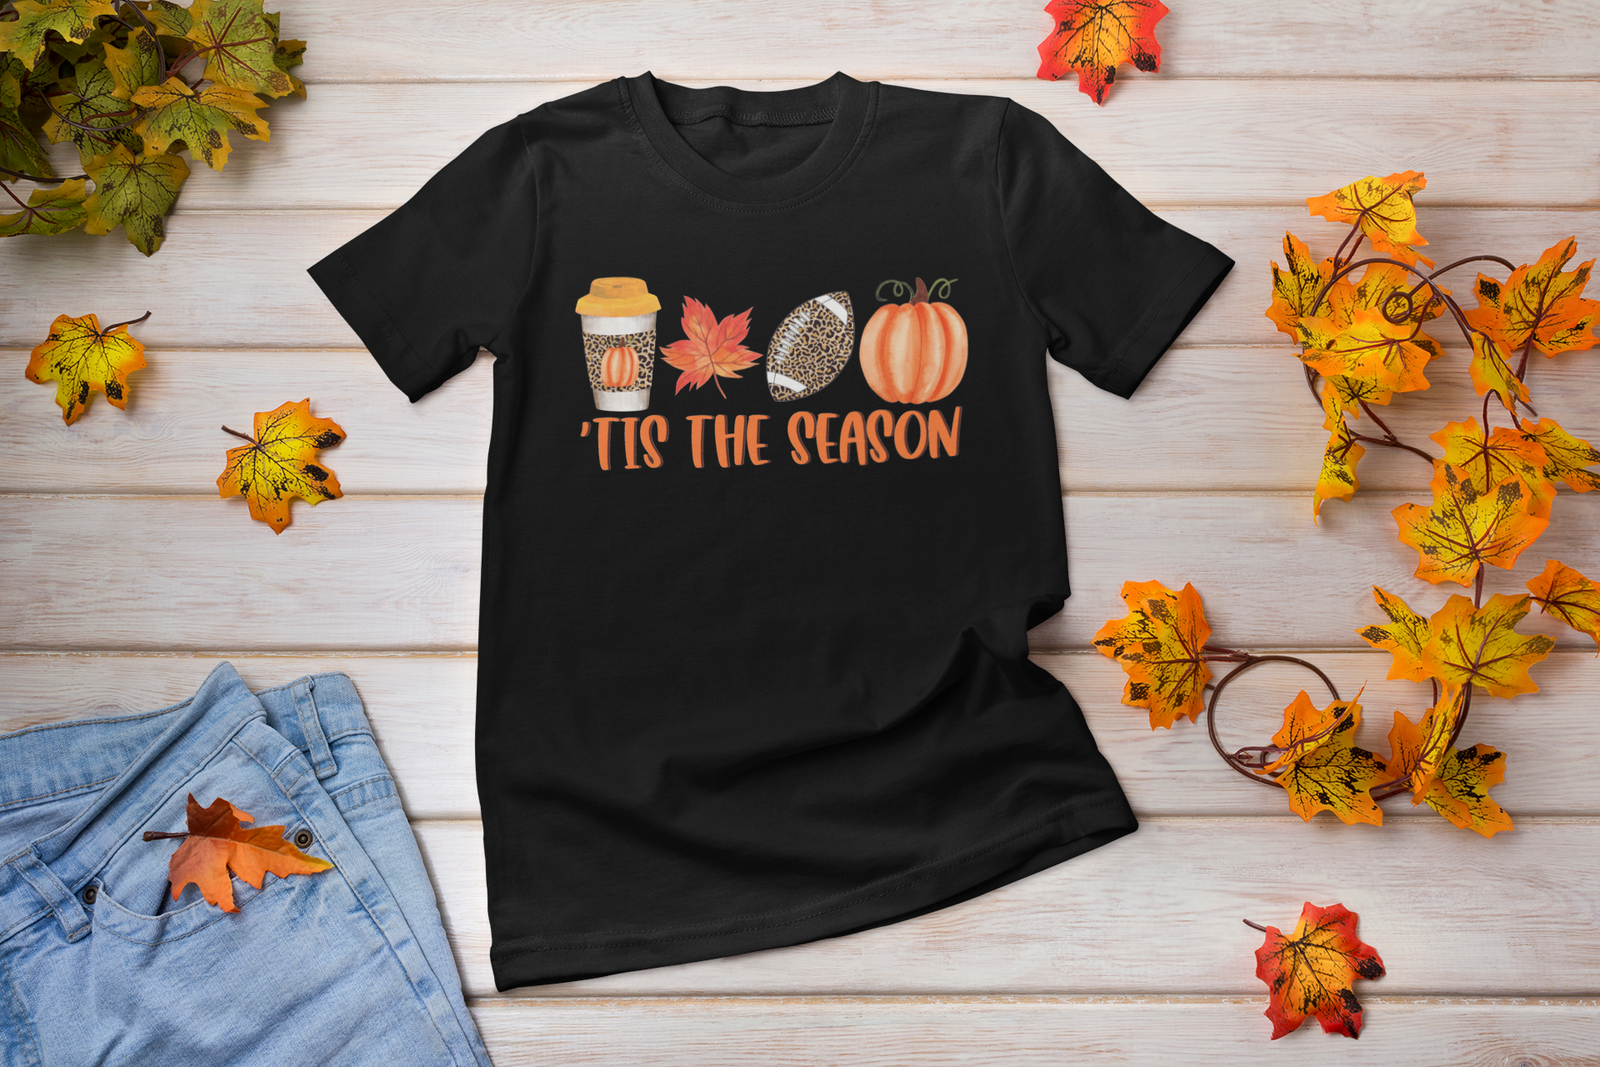 Spooktacular Halloween T-Shirts: Unleash Your Inner Ghoul